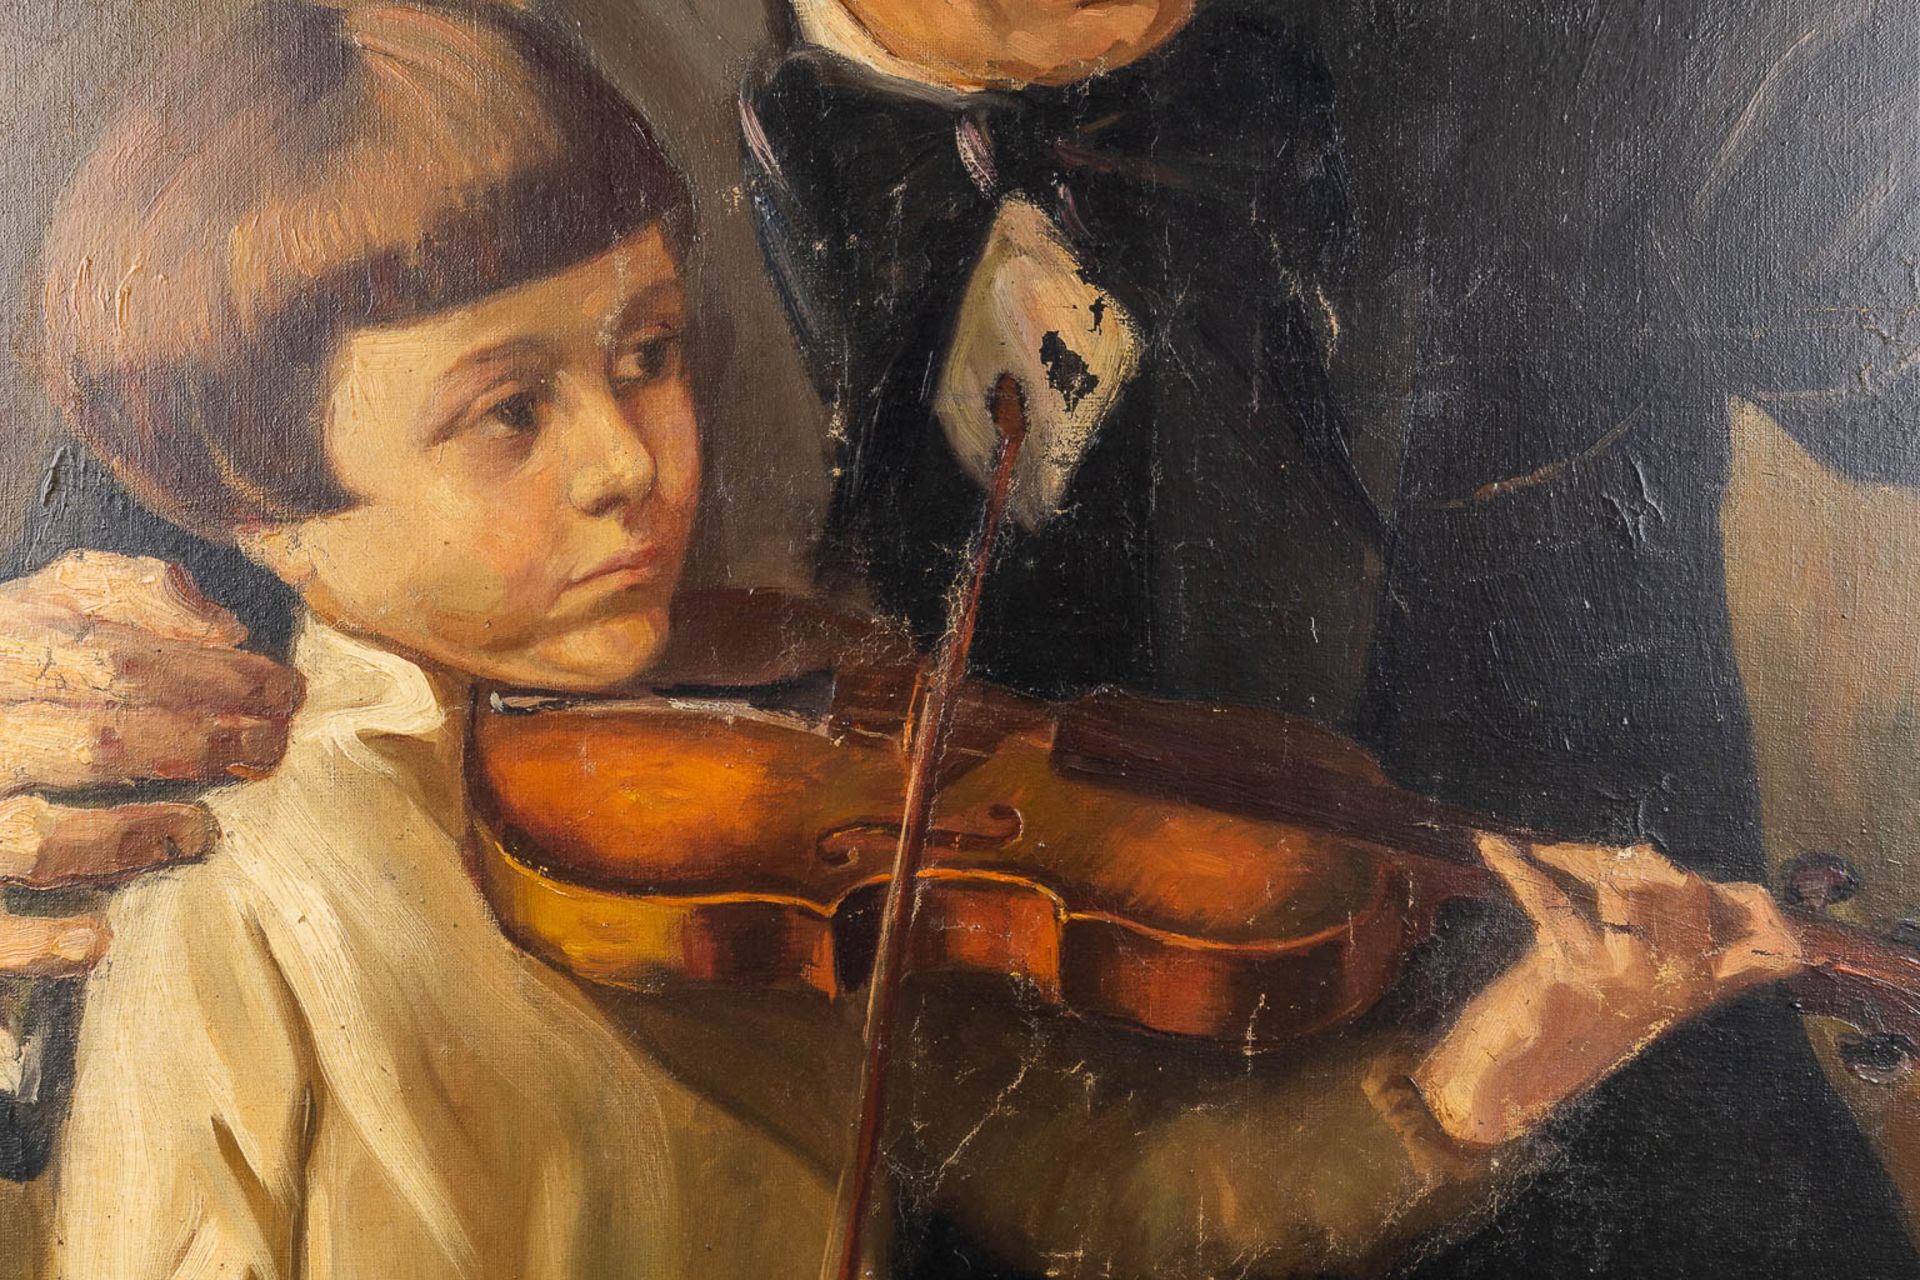 The Violin Player, a painting, oil on canvas. Signed Xanthopoulo. (W: 80 x H: 105 cm) - Image 6 of 12